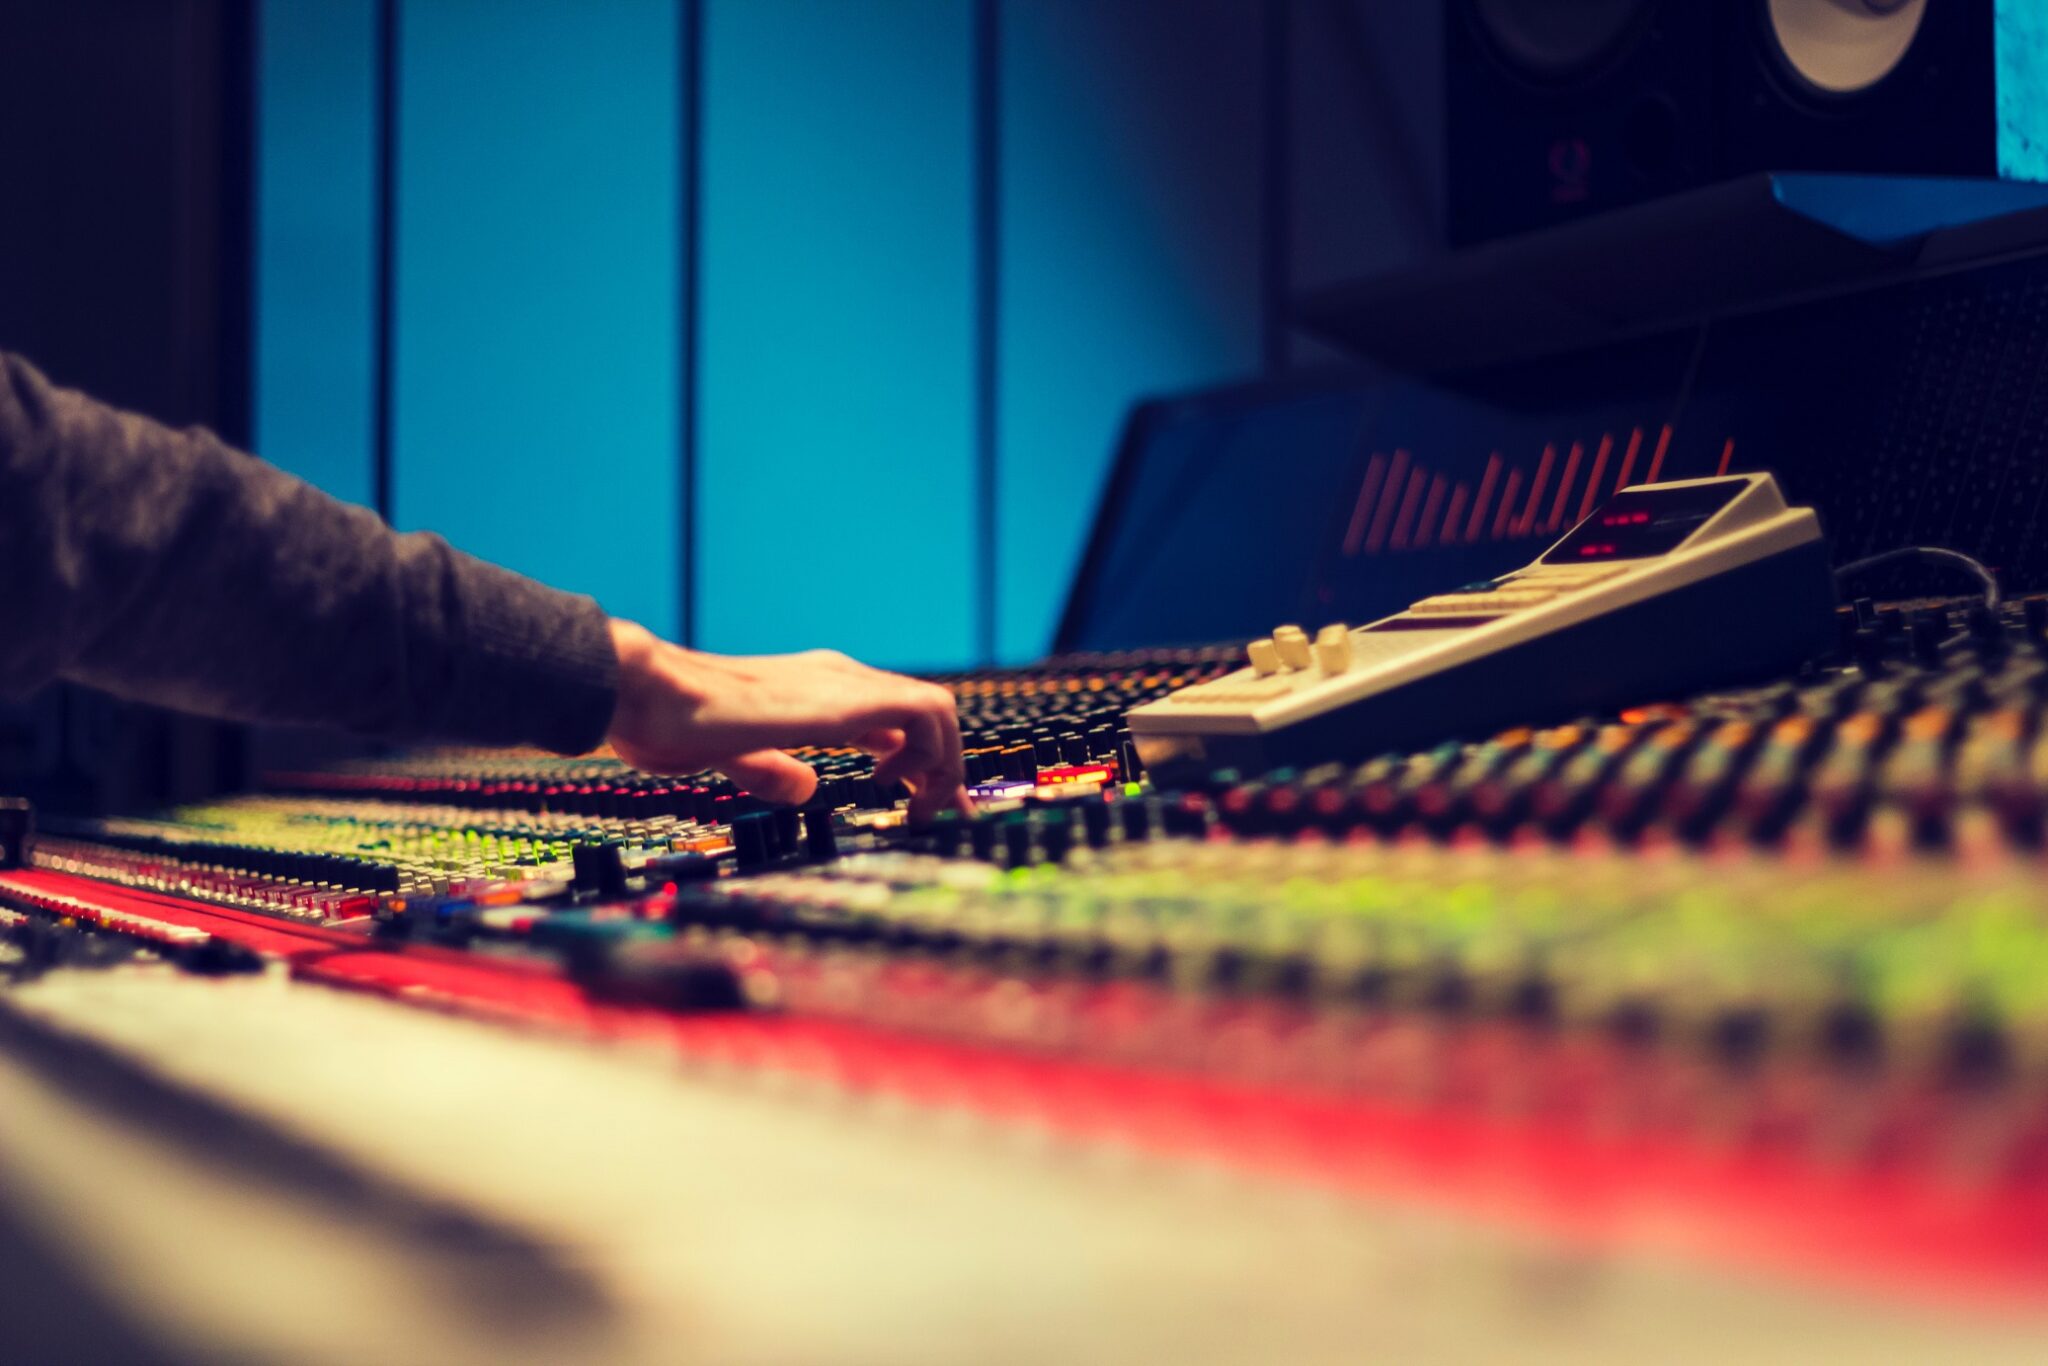 A horizontal photo of a hand operating a studio mixing board.